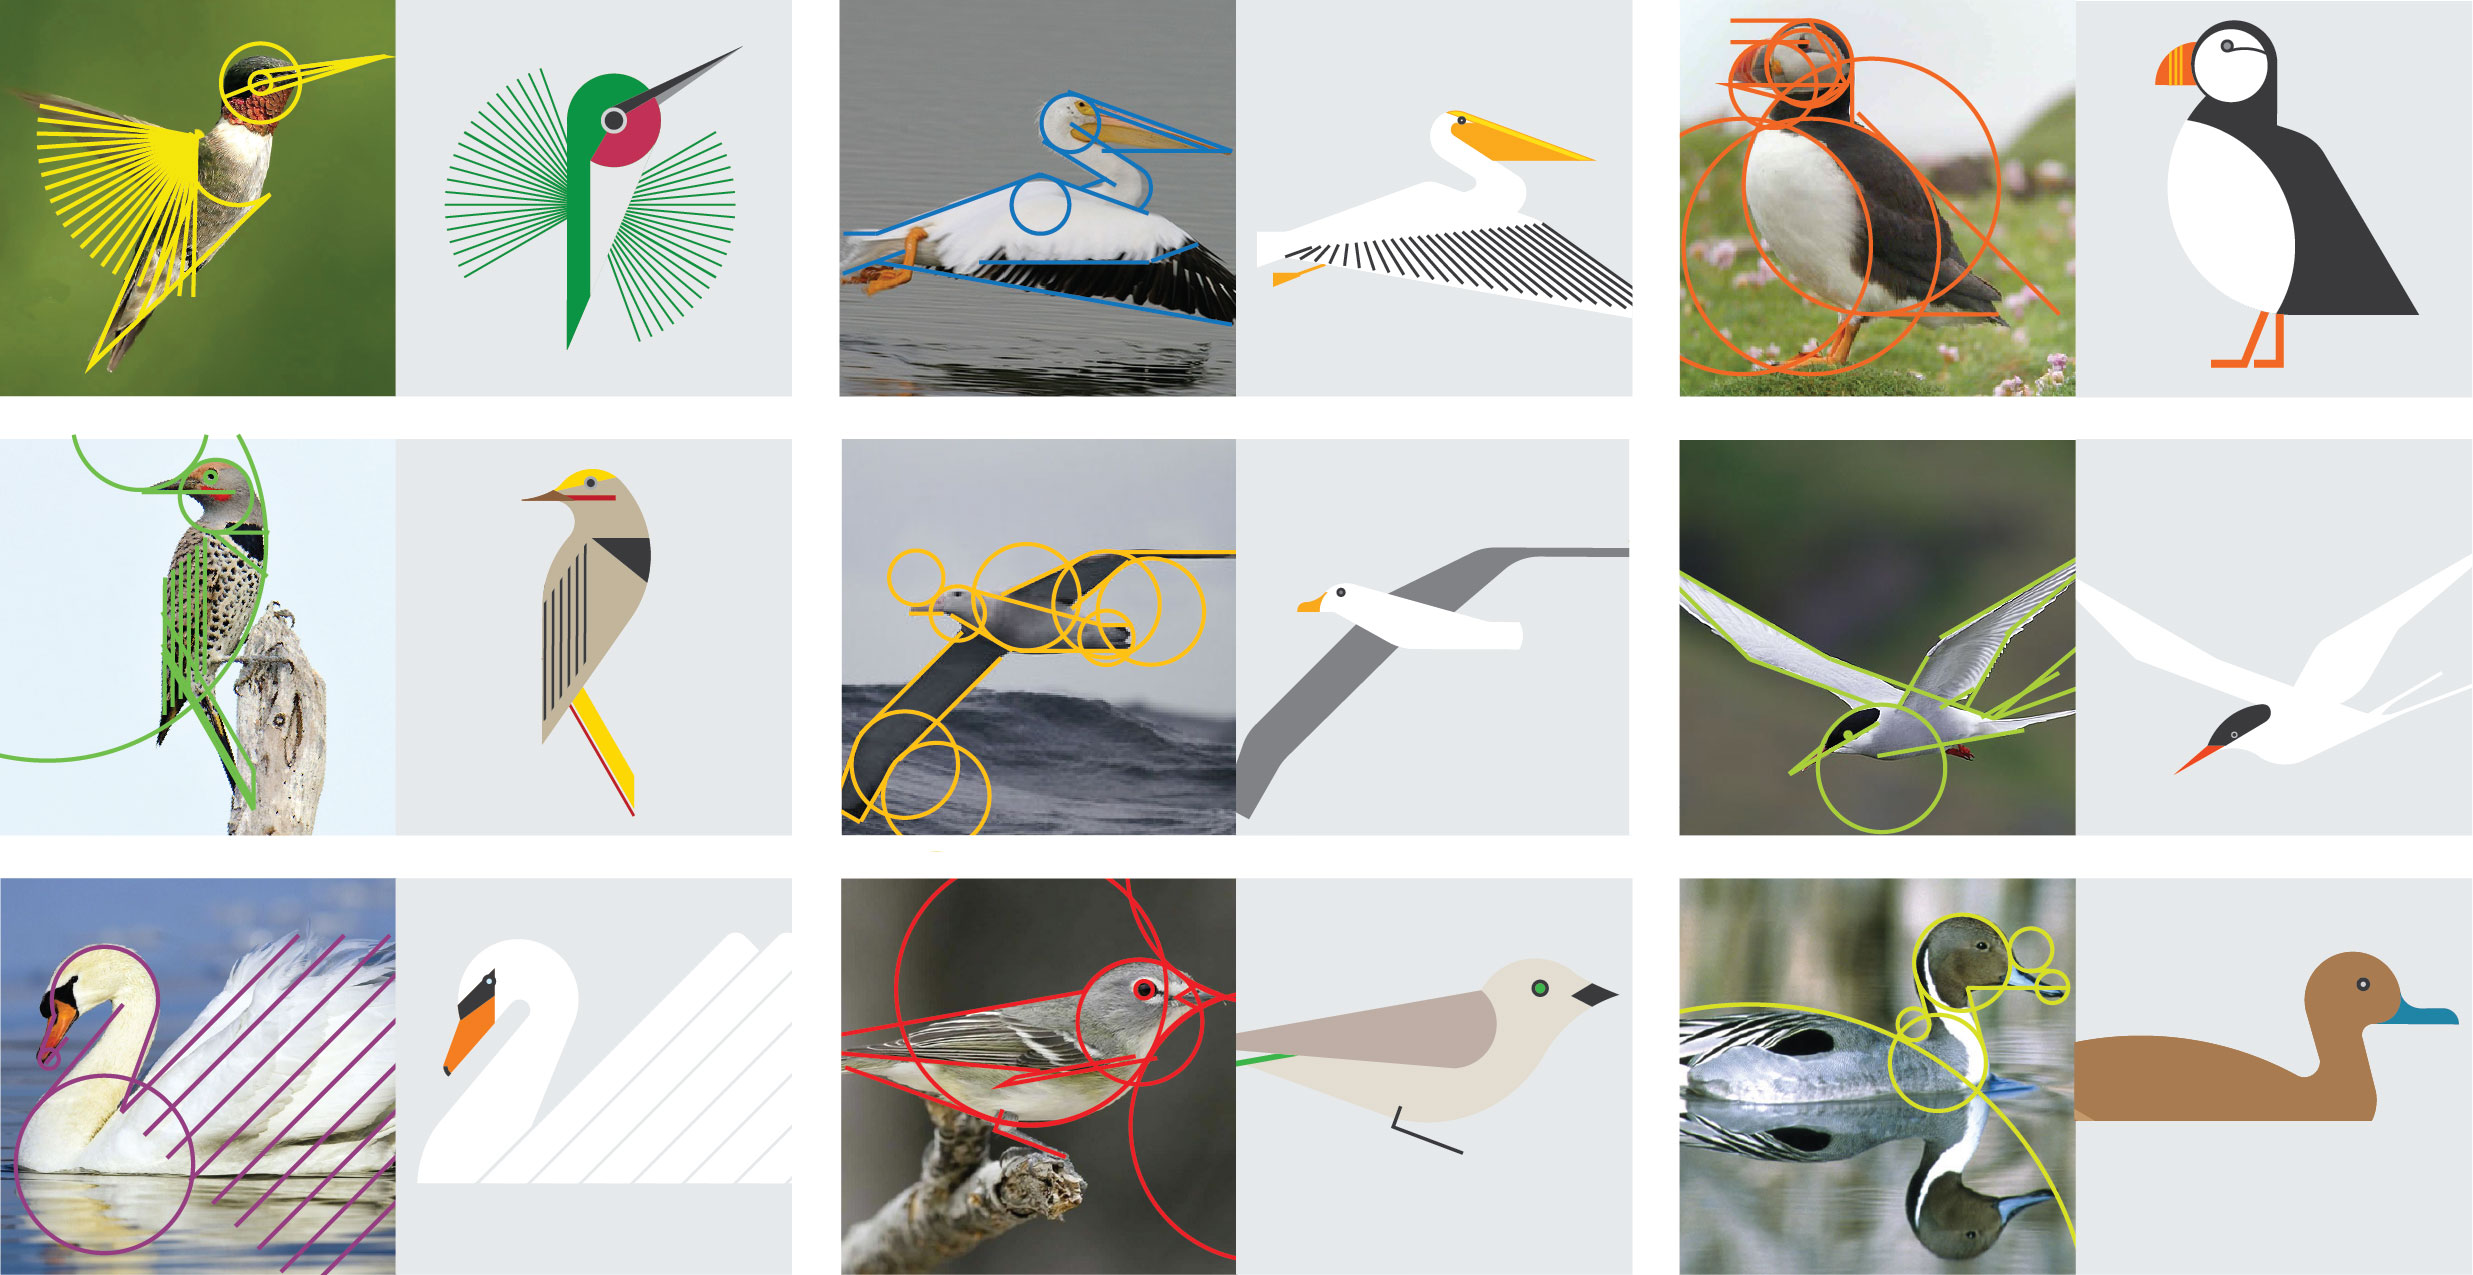 A sampling of nine bird photo-illustration pairings. Each photo has lines and circles overlaid which built the foundation for the structure of the illustration.